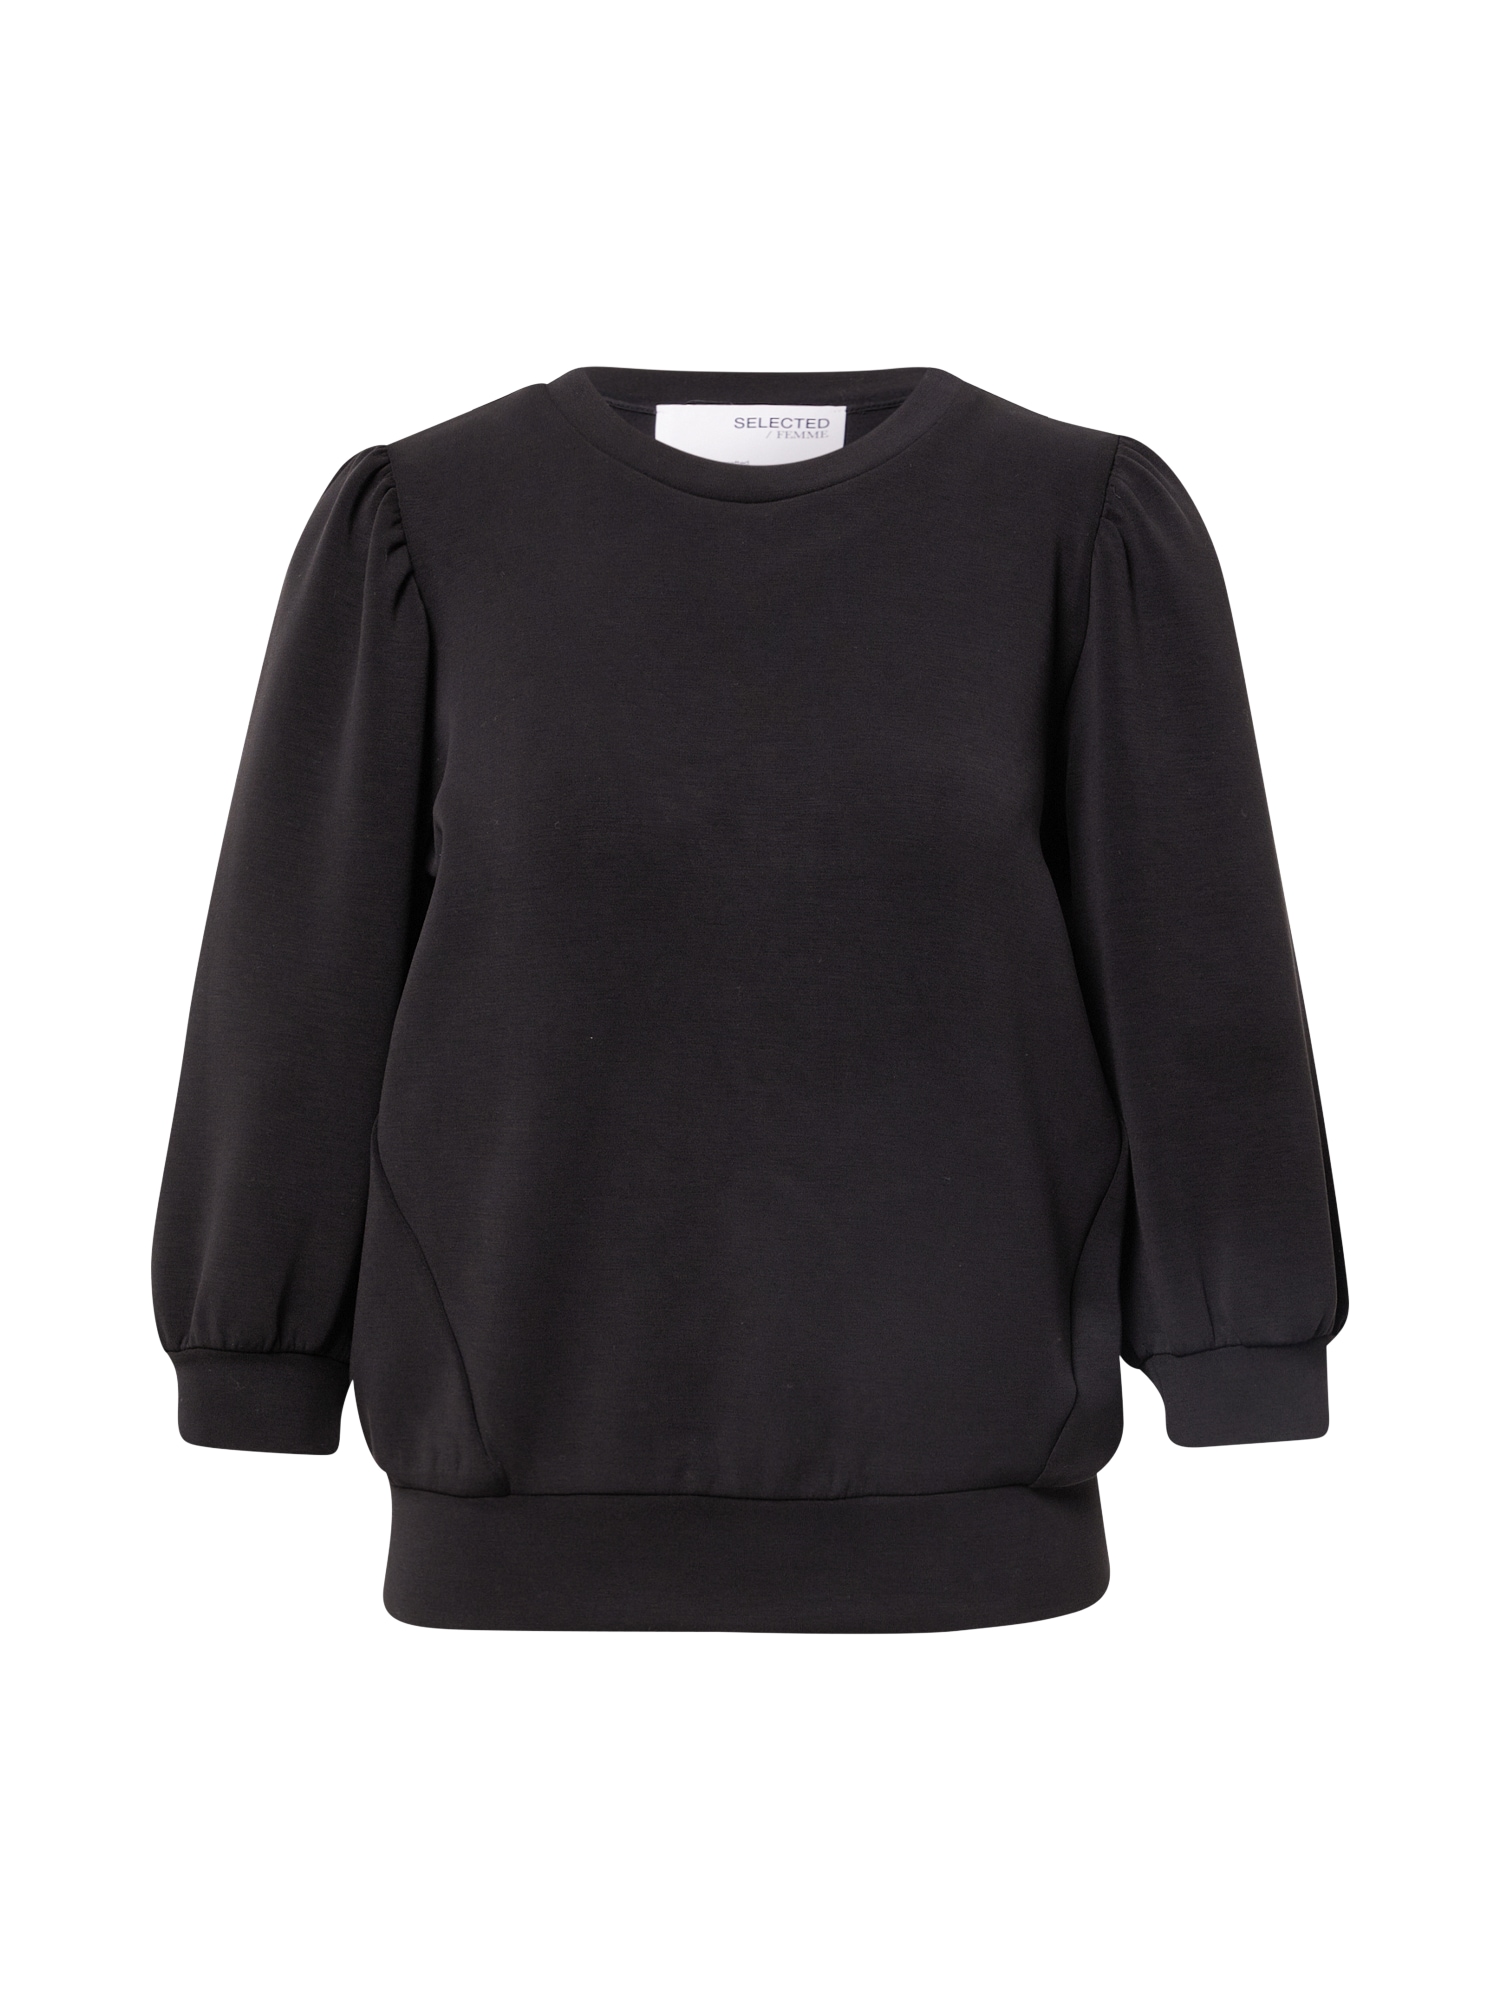 SELECTED FEMME Sweater majica 'TENNY'  crna